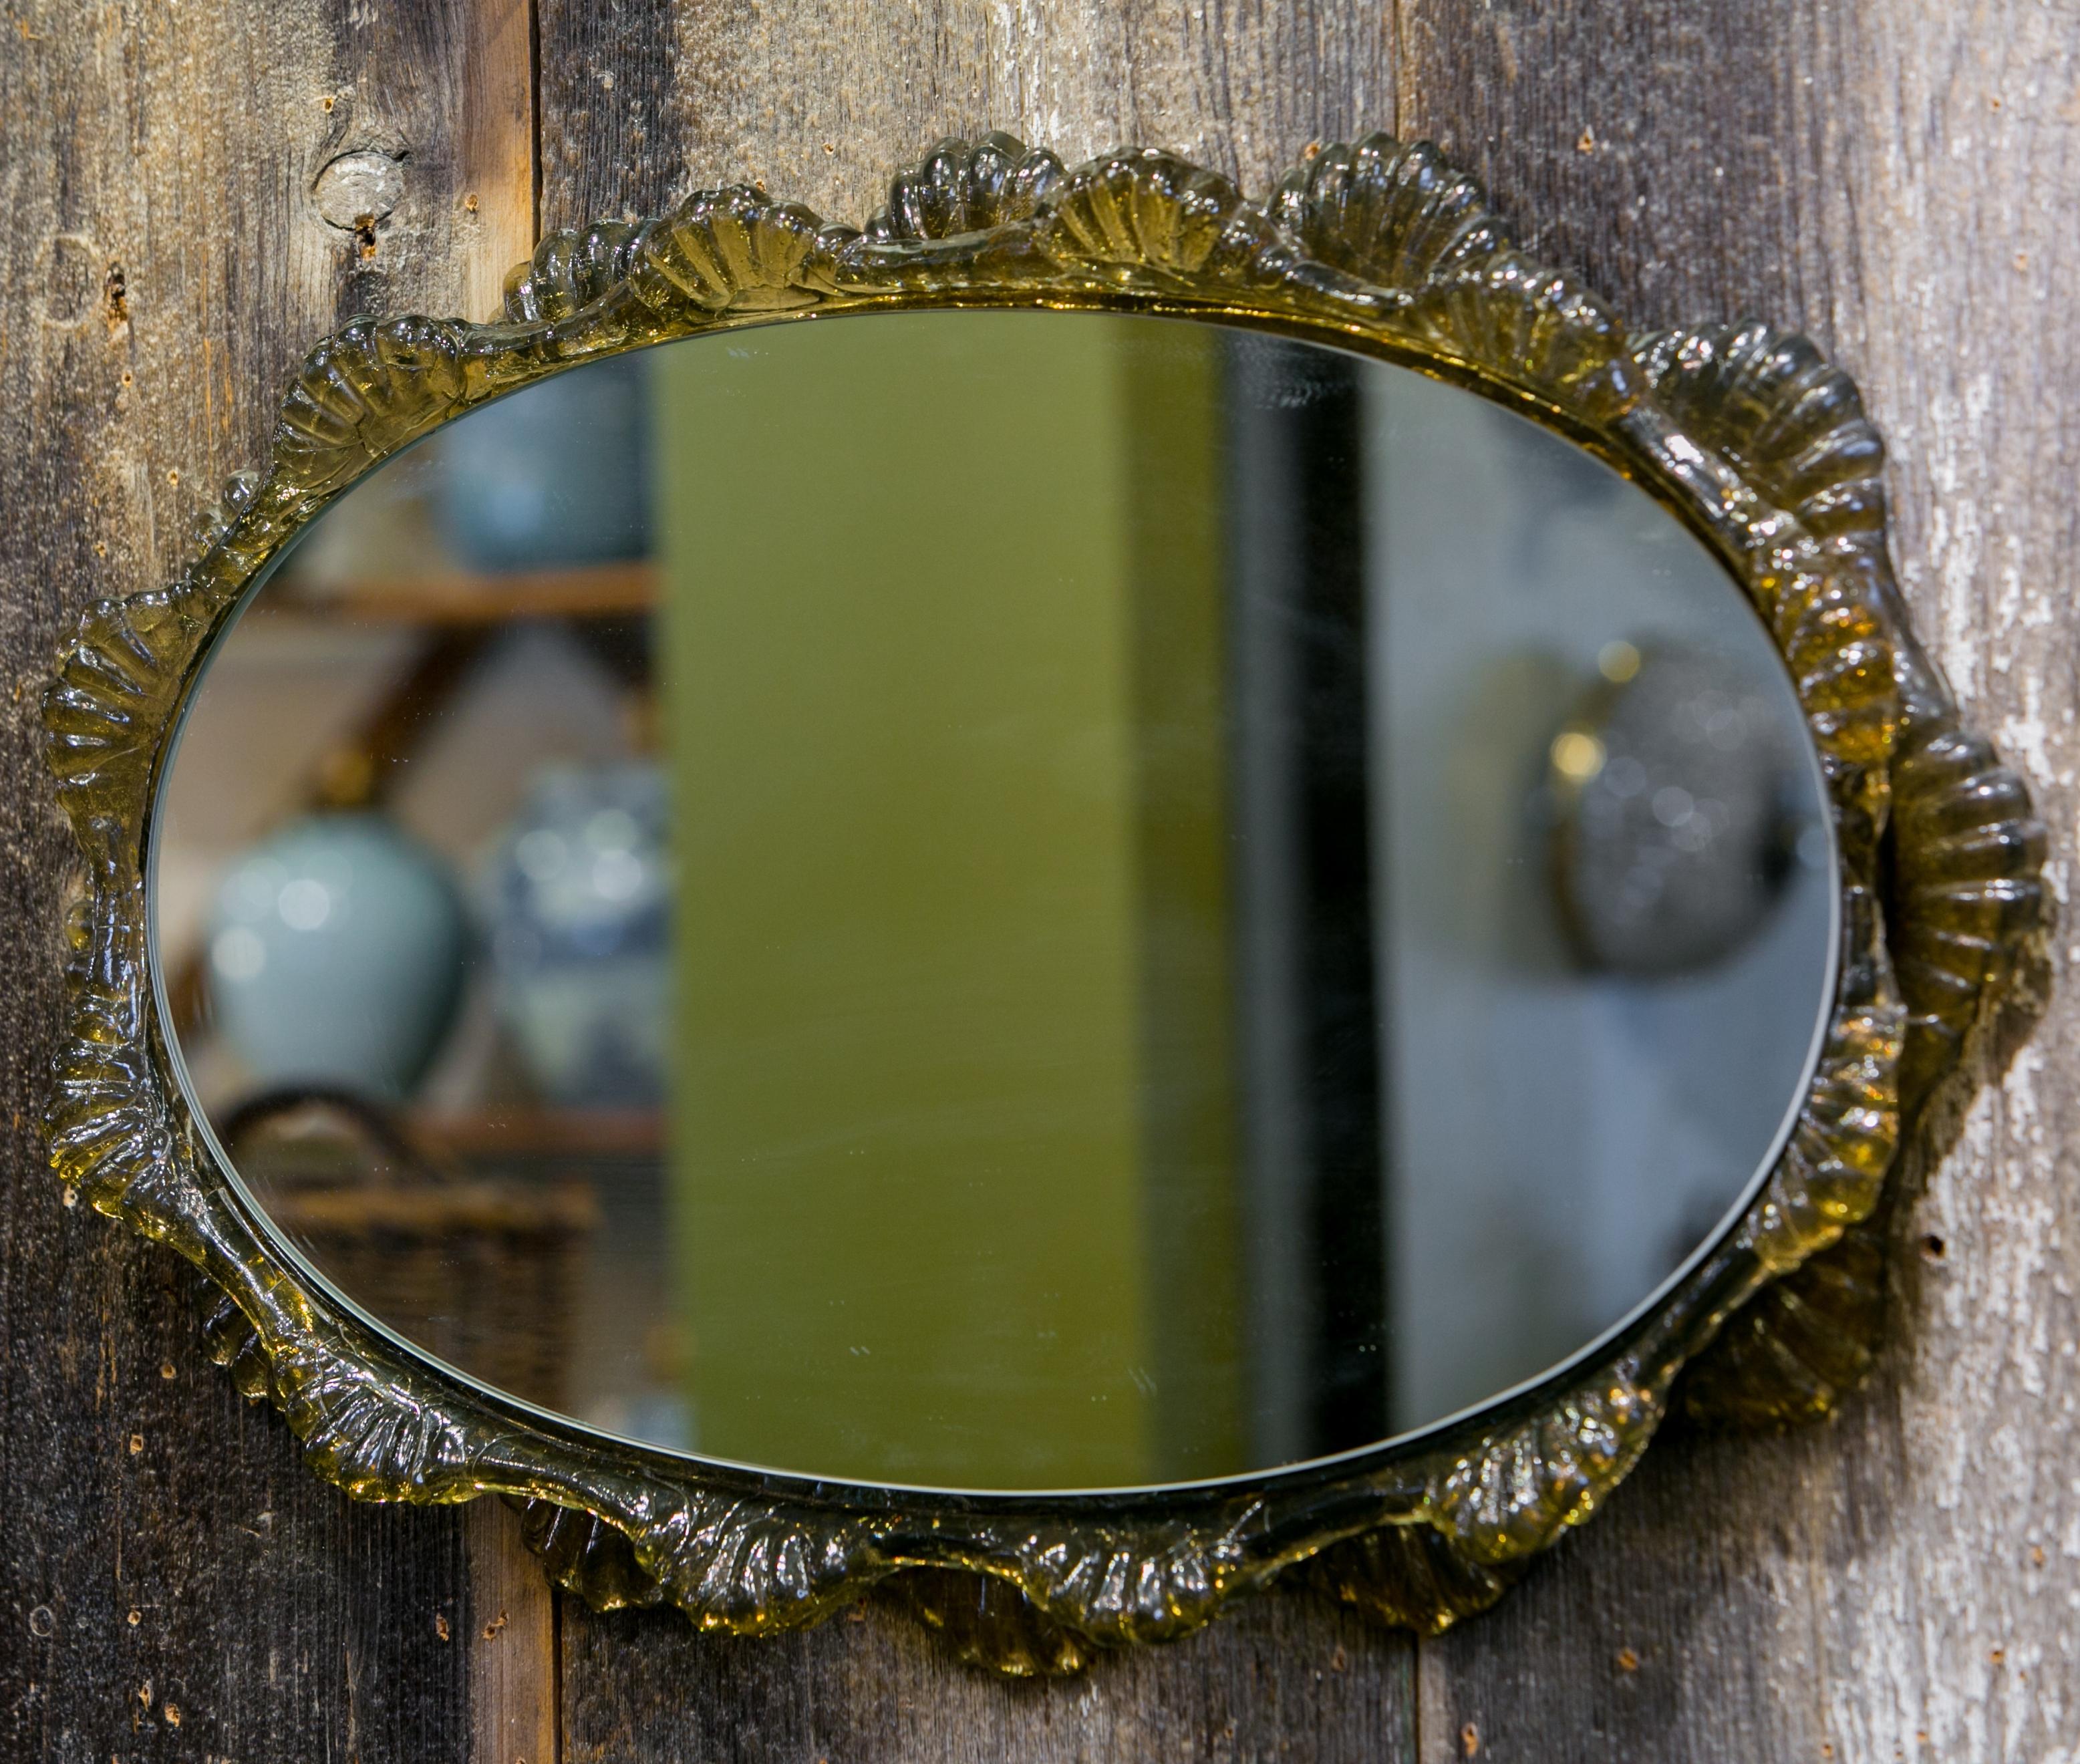 Mid-century polycarbonate mirror that mimics Murano glass. This interesting mirror appears to be glass, but is plastic. Its color is kind of a semi-transparent green tea color. All original and a nice accent to any room.